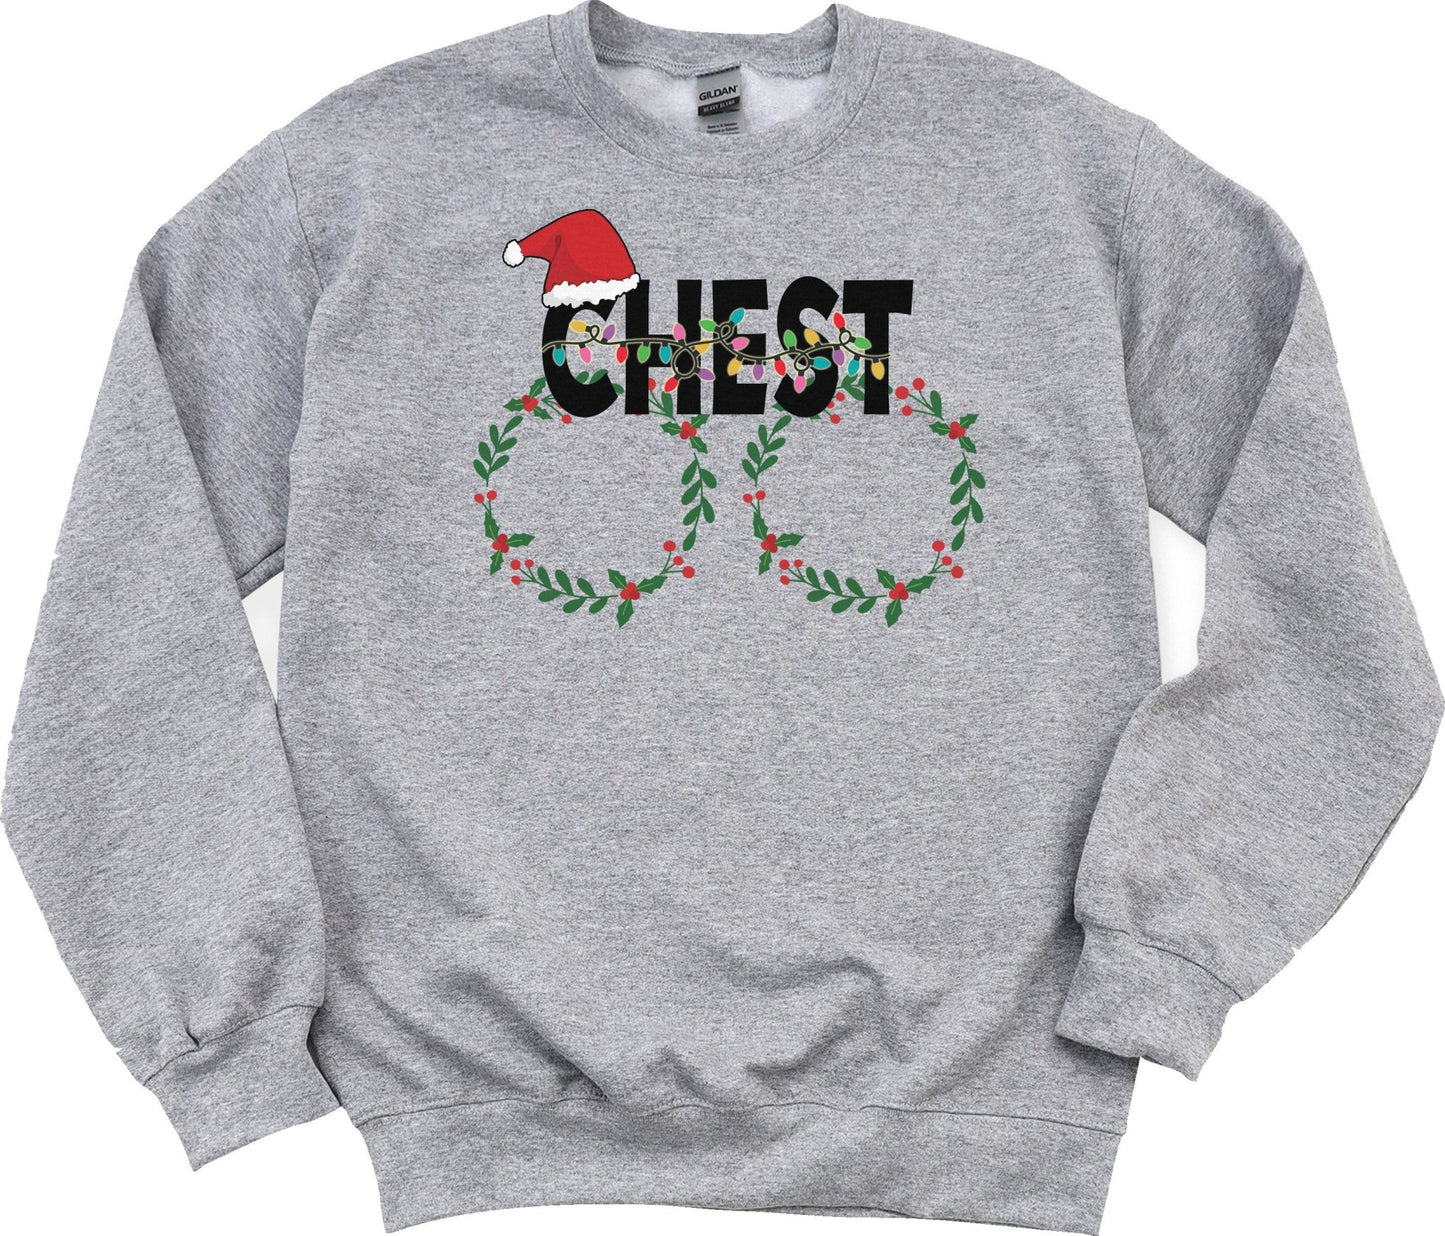 Chest and Nuts Christmas Couples Sweatshirt - SBS T Shop